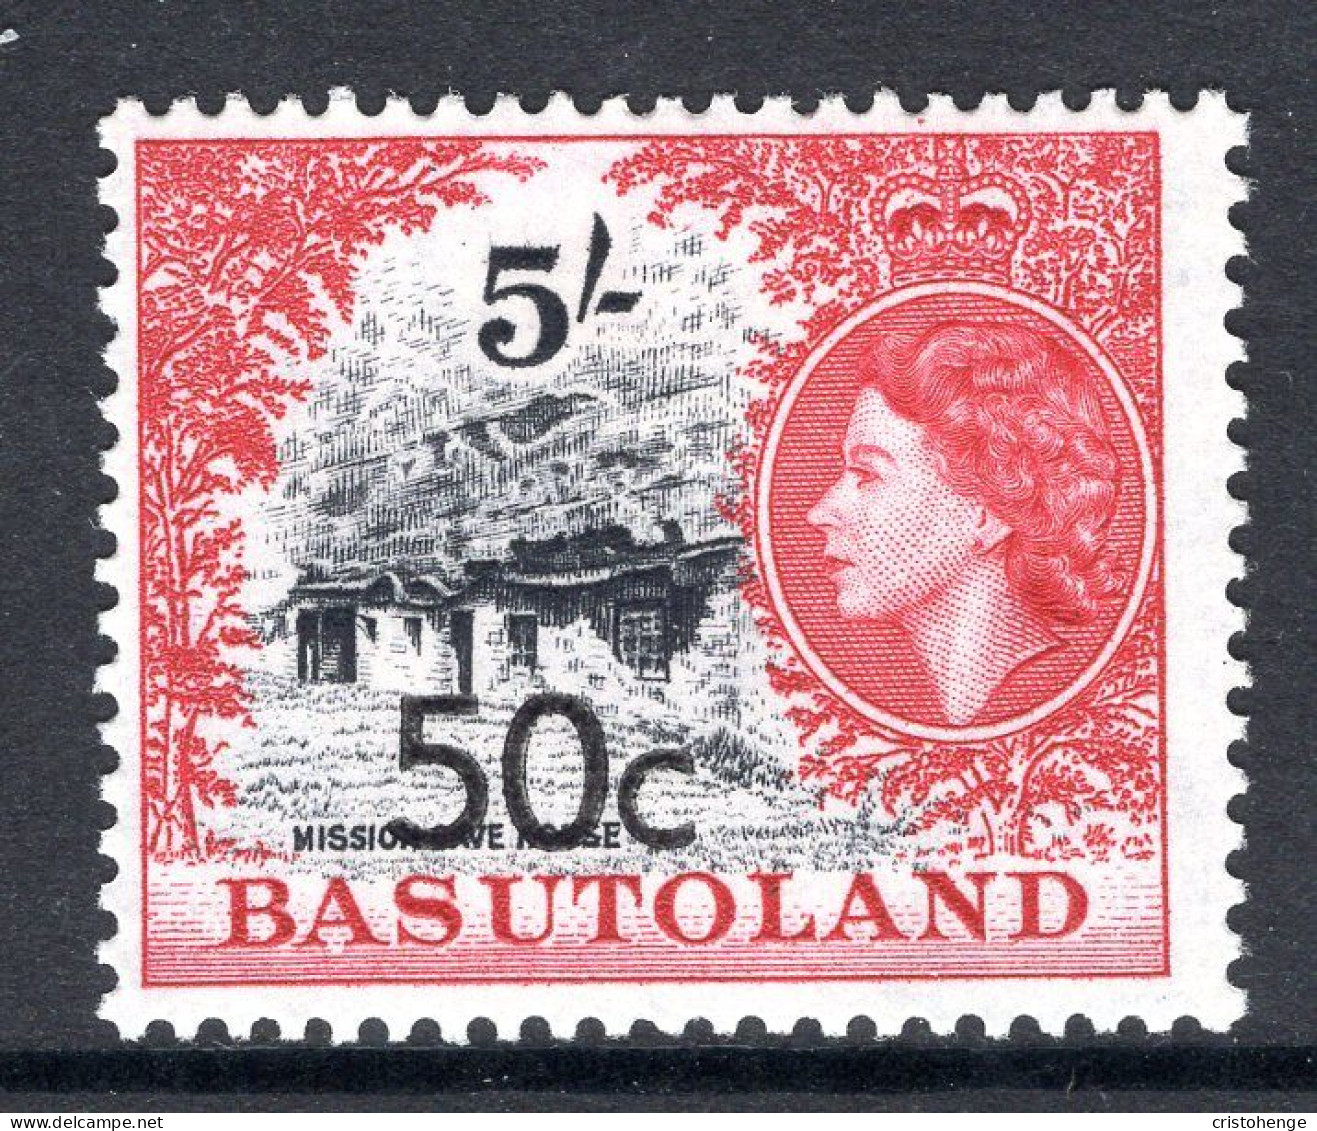 Basutoland 1961 Decimal Surcharges - 50c On 5/- Mission Cave House - Type II - HM (SG 67a) - 1933-1964 Crown Colony